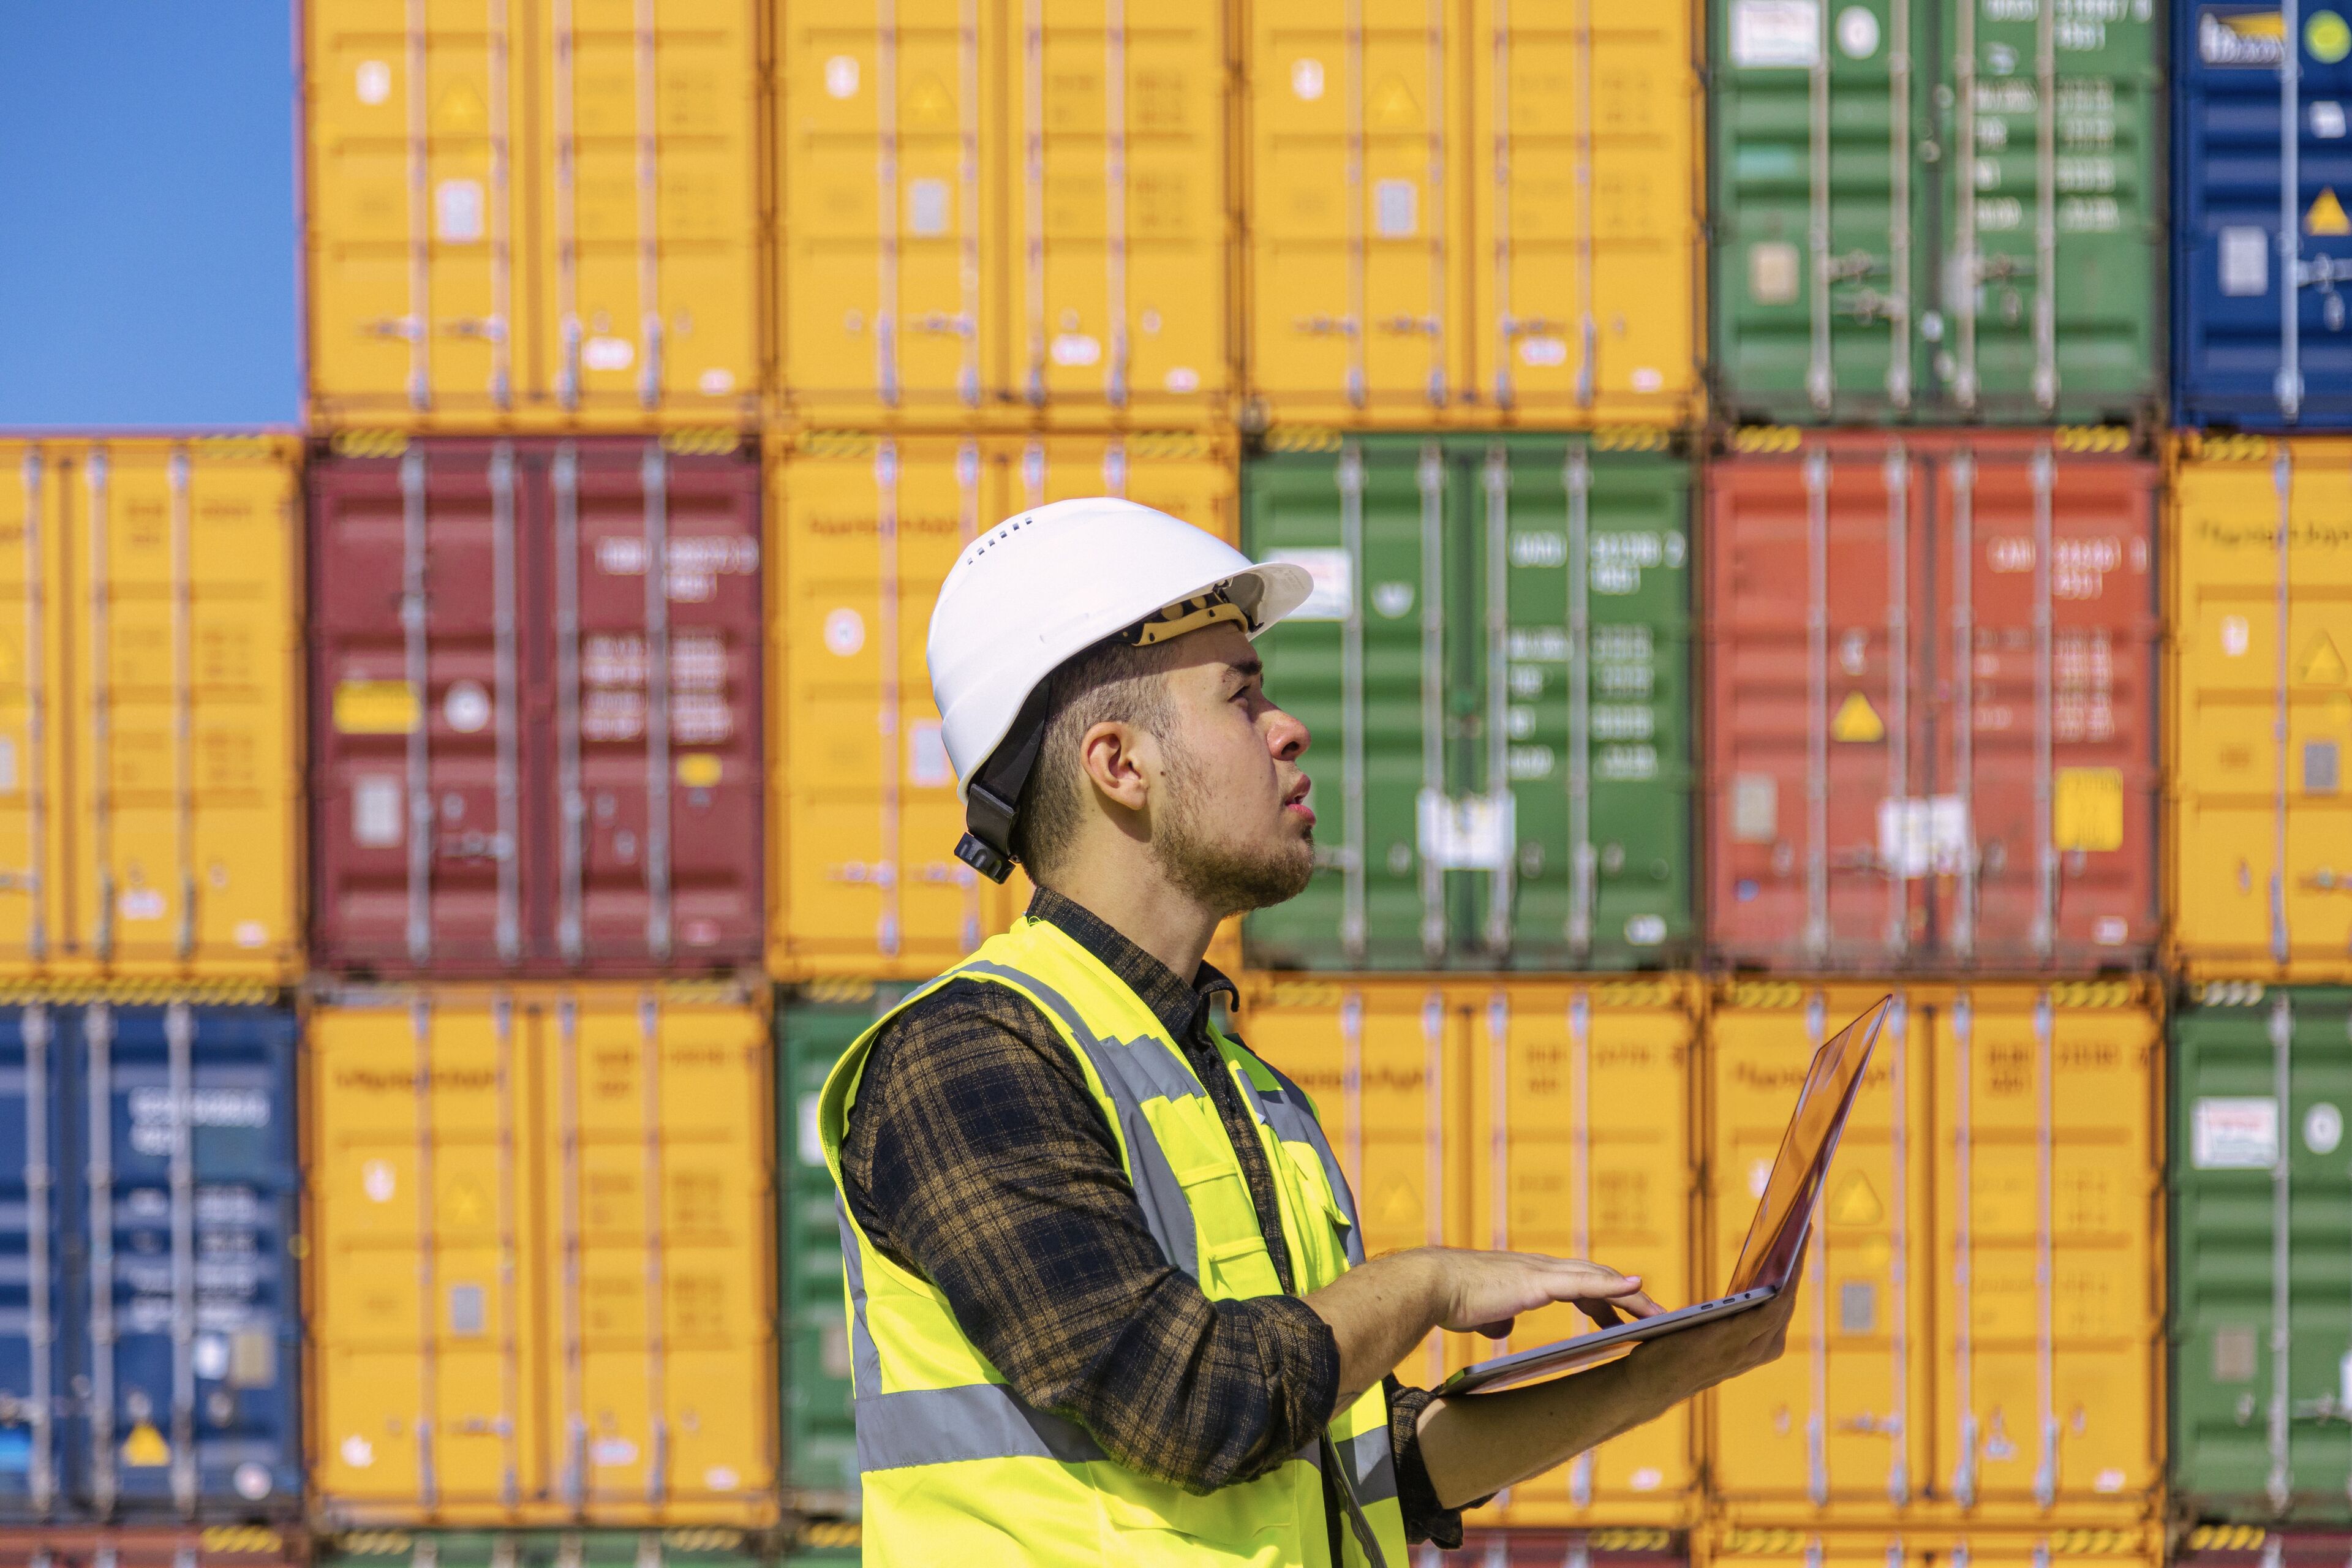 ImageA man in a safety vest and helmet inspects paperwork with cargo containers in the background.